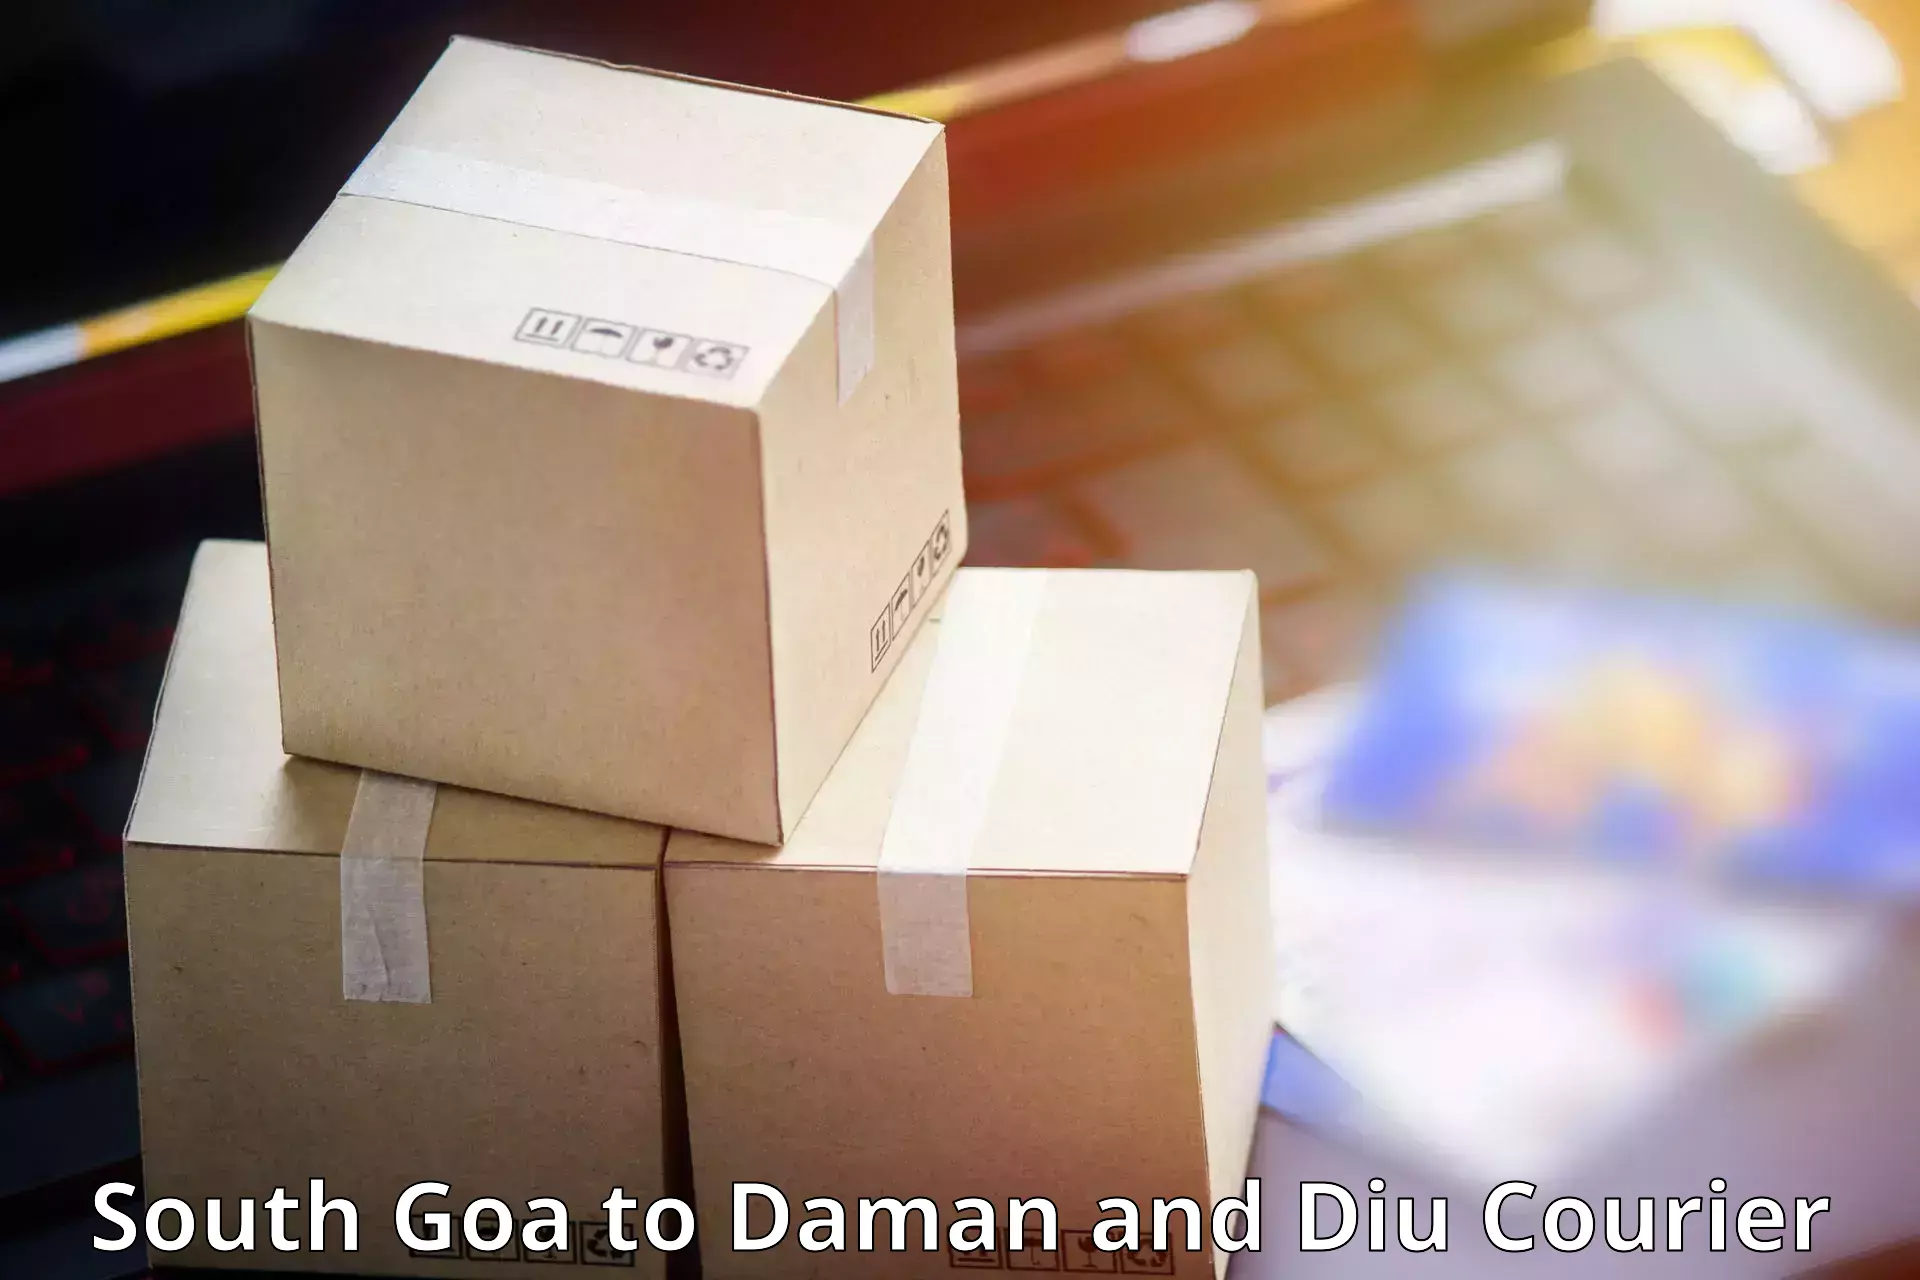 Same-day delivery solutions South Goa to Daman